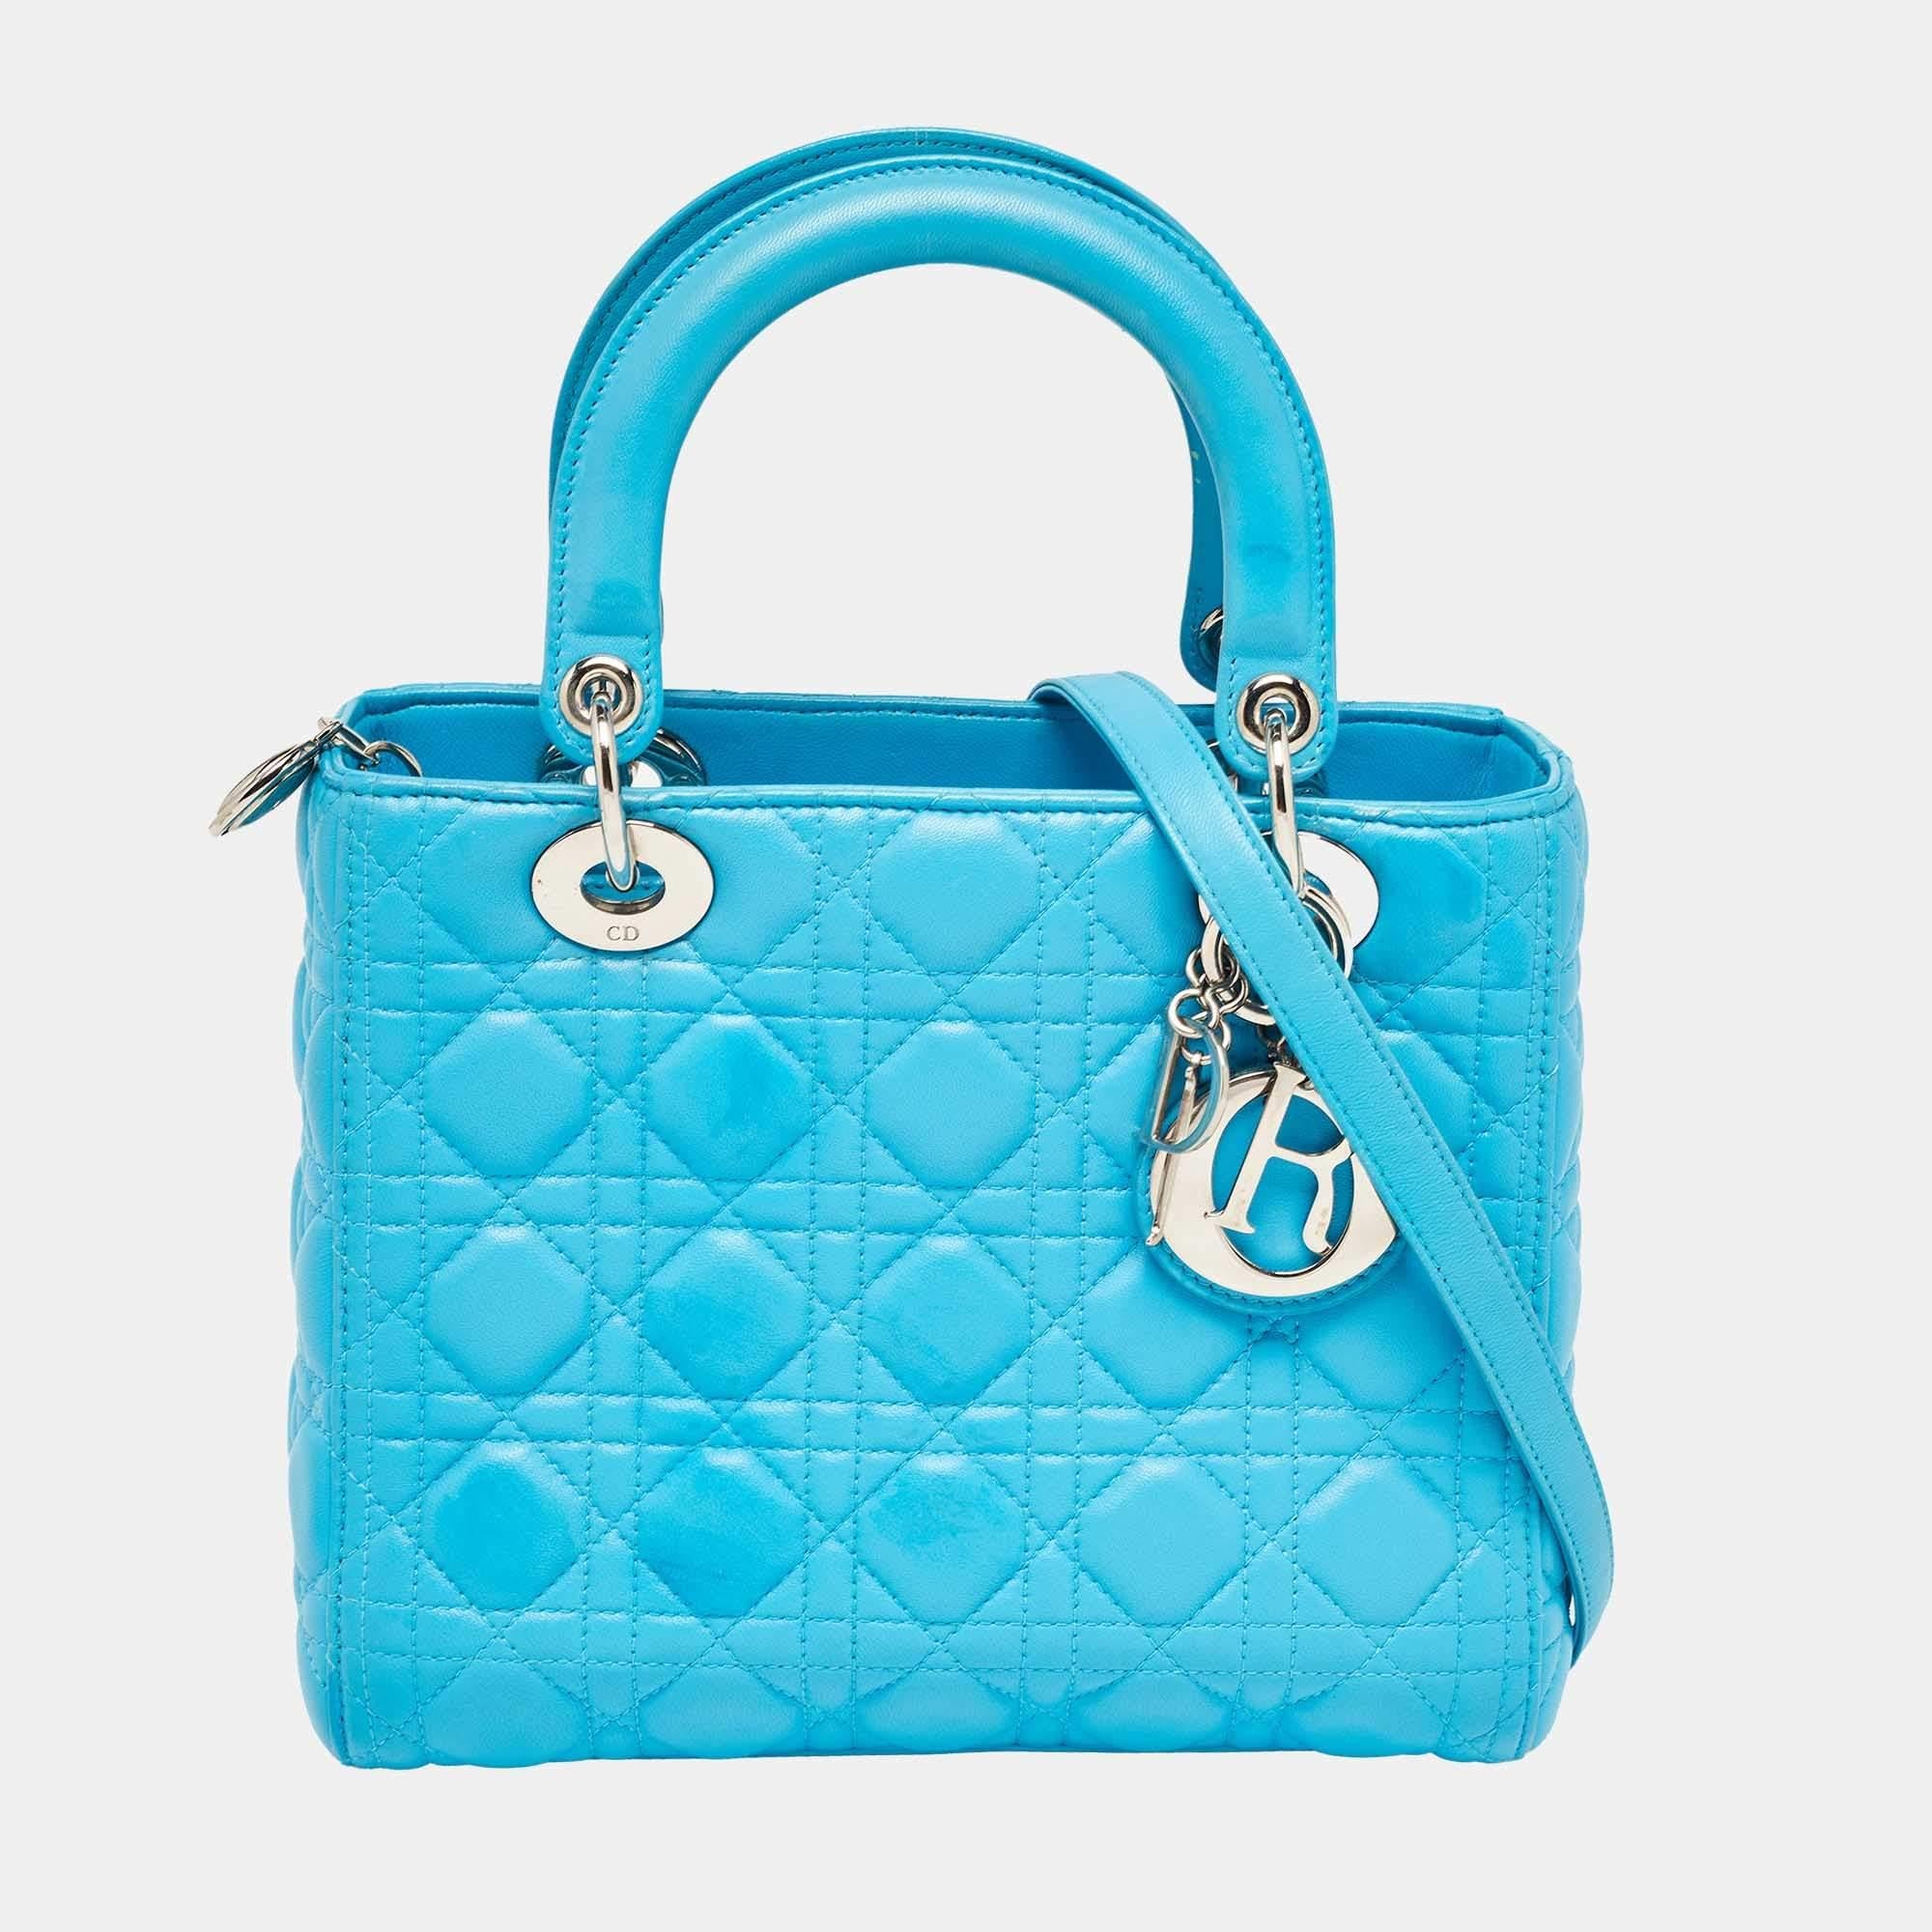 Dior Blue Cannage Leather Medium Lady Dior Tote For Sale 2